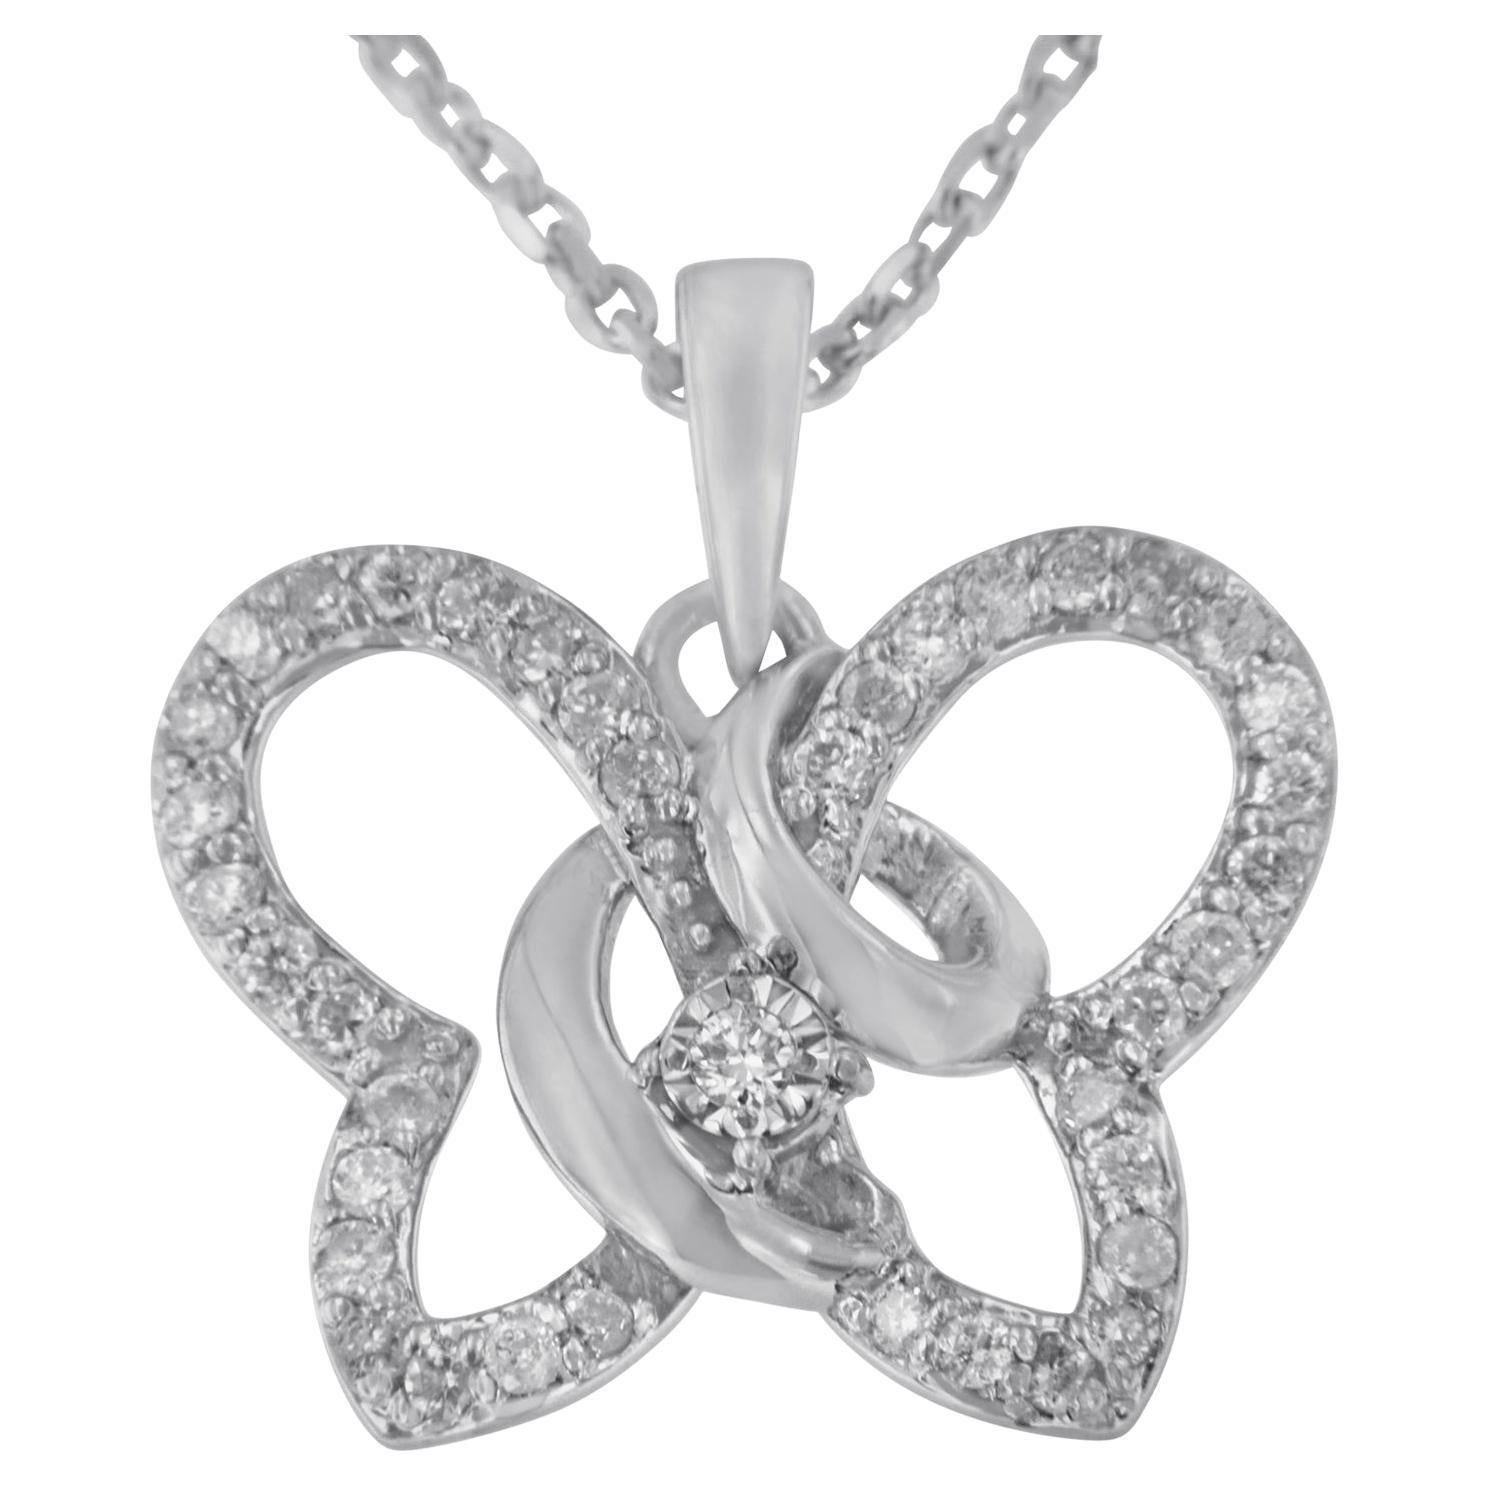 .925 Sterling Silver 1/4 Carat Diamond Butterfly Pendant Necklace with Box Chain